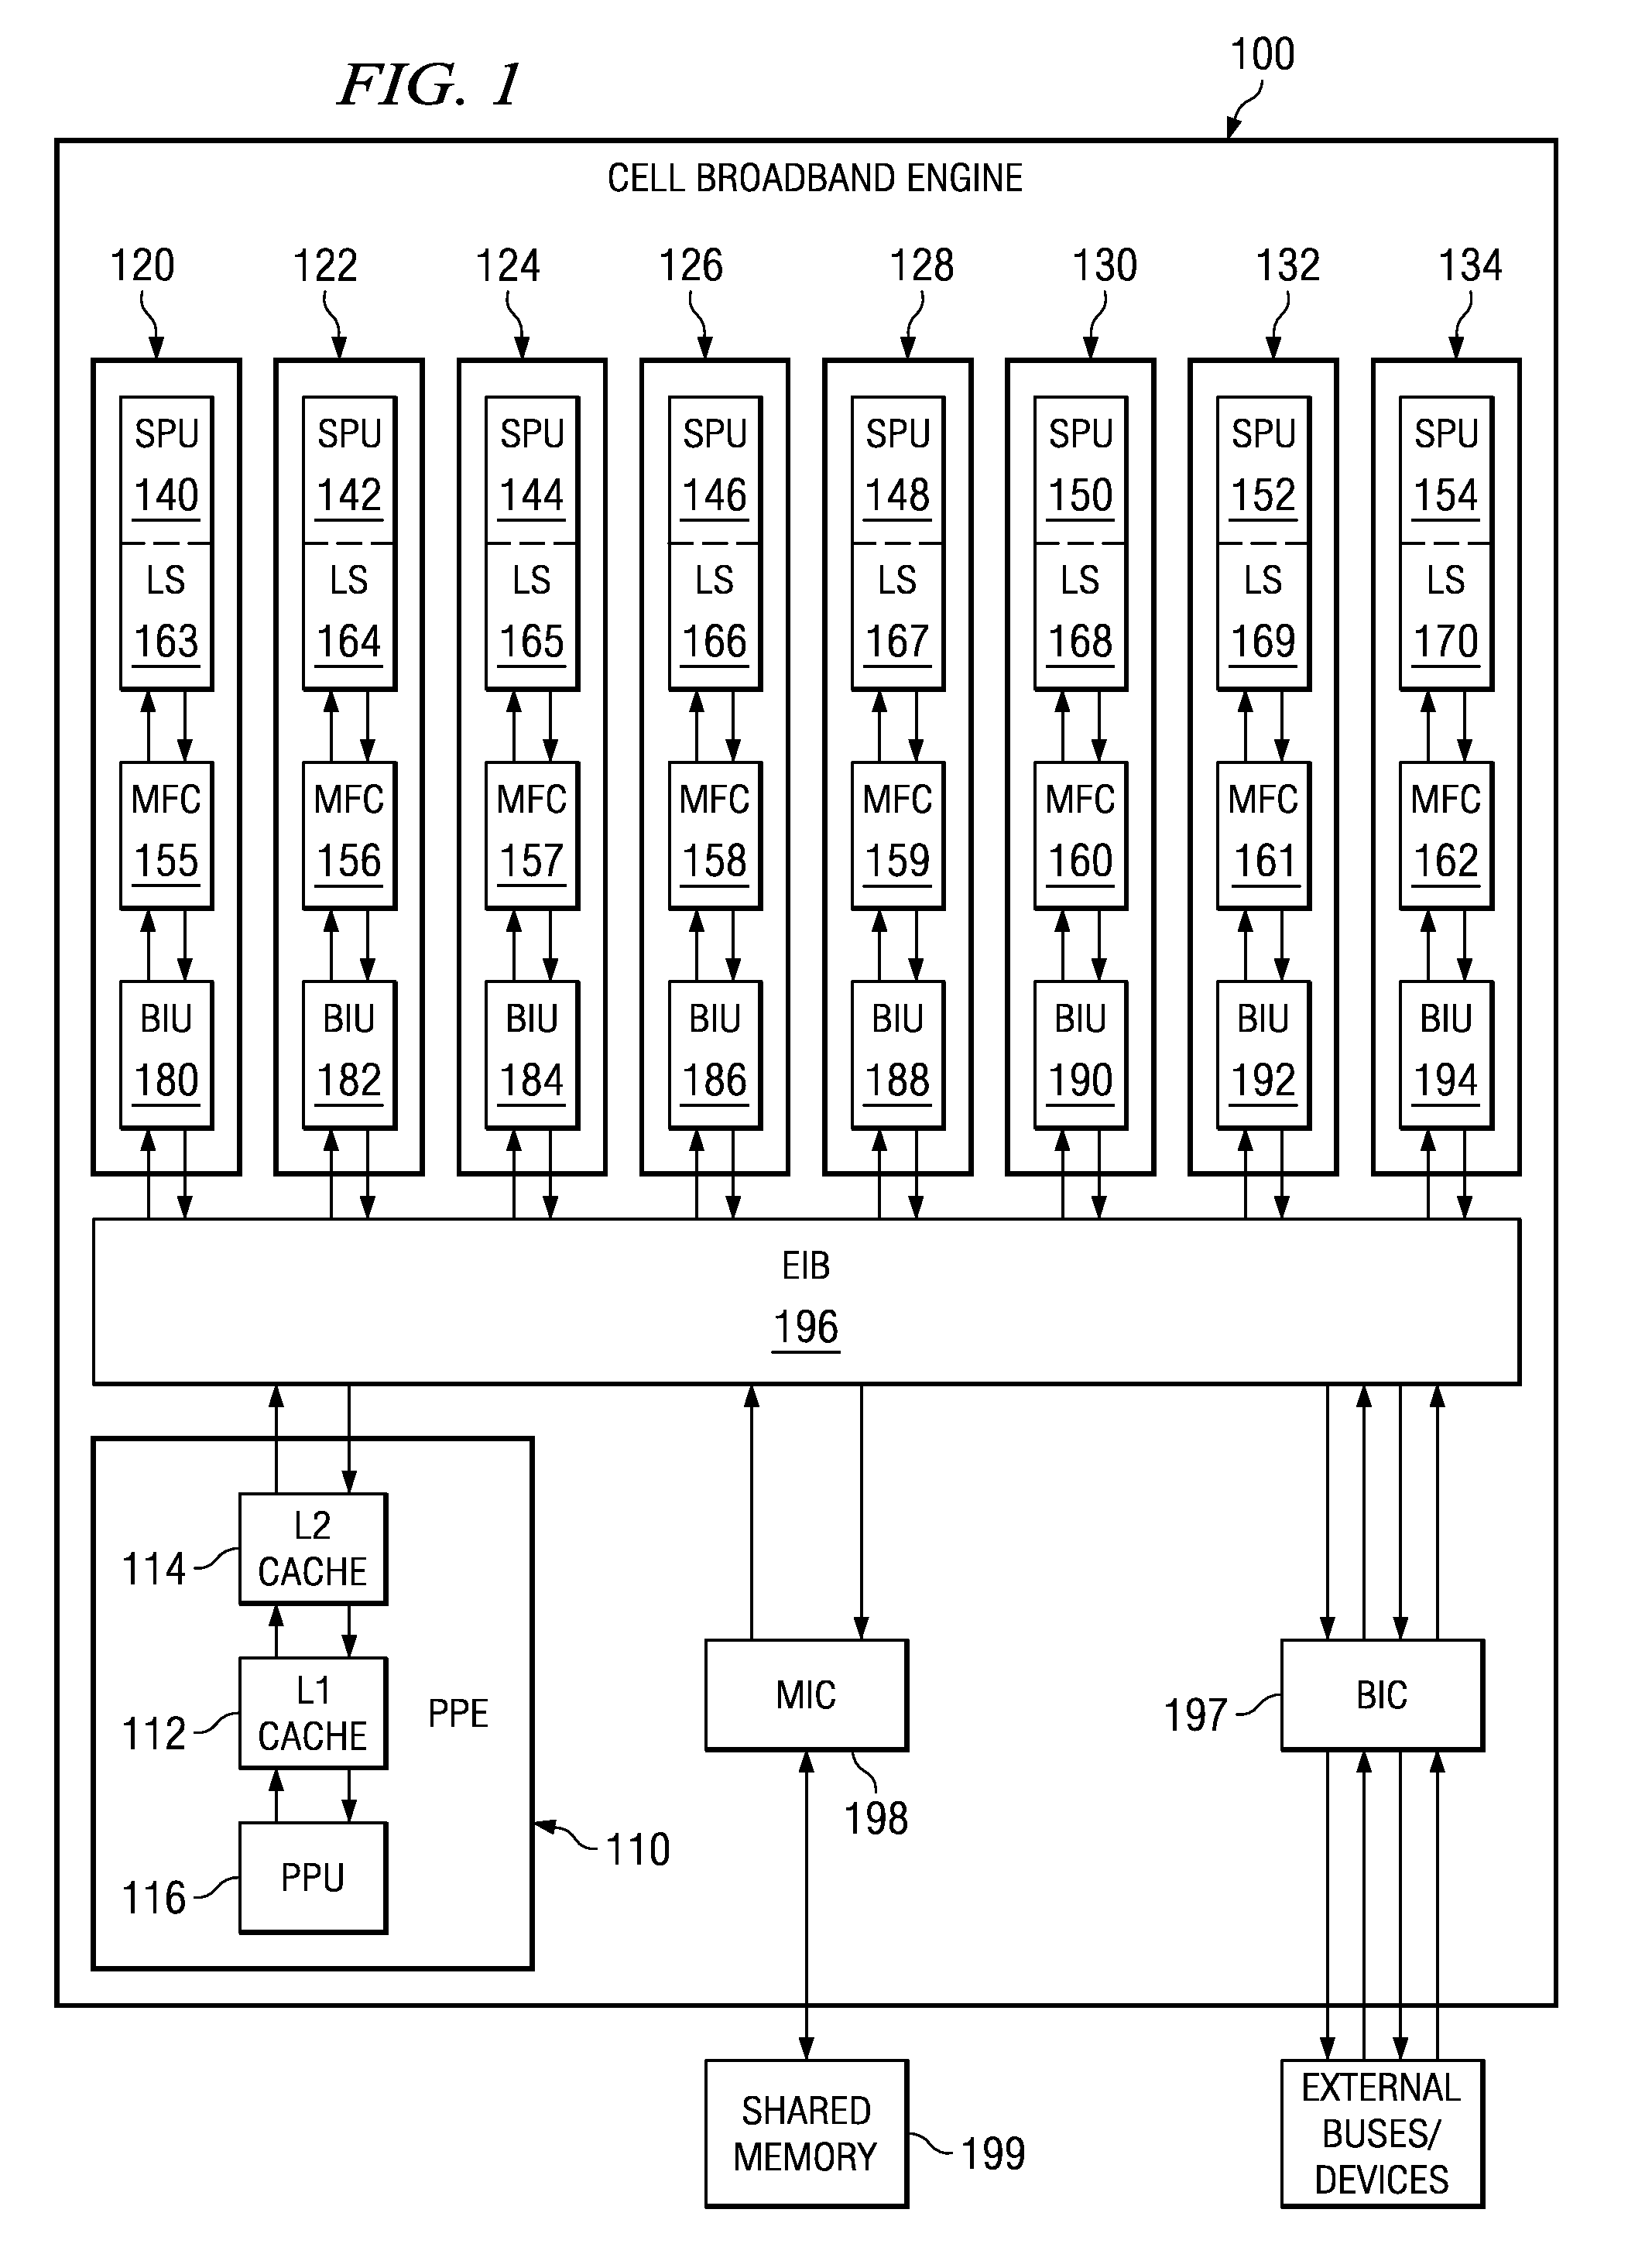 Barrier and Interrupt Mechanism for High Latency and Out of Order DMA Device